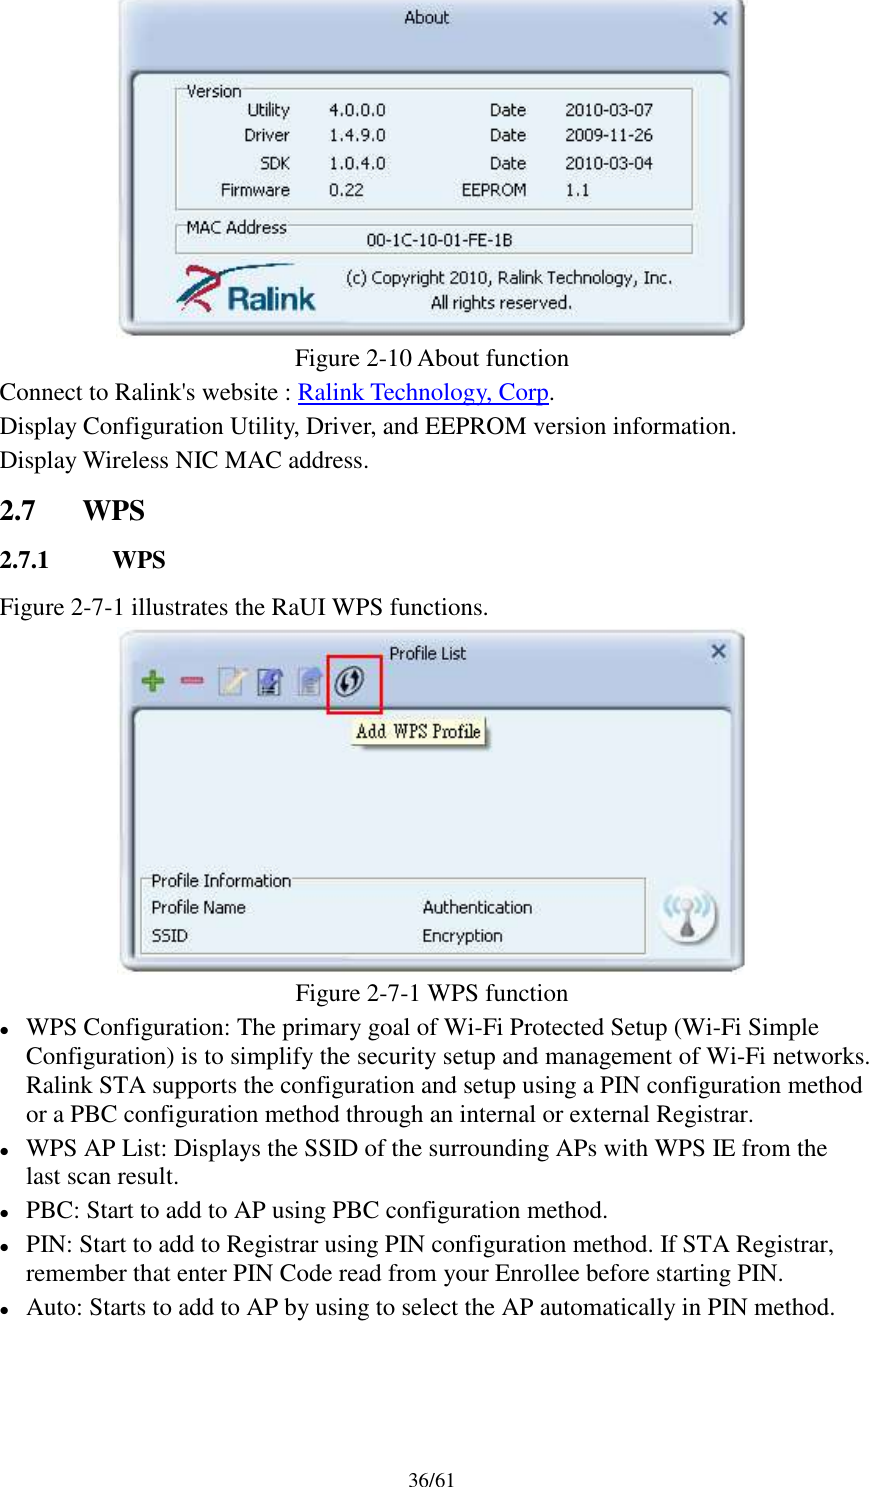 36/61Figure 2-10 About functionConnect to Ralink&apos;s website : Ralink Technology, Corp.Display Configuration Utility, Driver, and EEPROM version information.Display Wireless NIC MAC address.2.7 WPS2.7.1 WPSFigure 2-7-1 illustrates the RaUI WPS functions.Figure 2-7-1 WPS functionWPS Configuration: The primary goal of Wi-Fi Protected Setup (Wi-Fi SimpleConfiguration) is to simplify the security setup and management of Wi-Fi networks.Ralink STA supports the configuration and setup using a PIN configuration methodor a PBC configuration method through an internal or external Registrar.WPS AP List: Displays the SSID of the surrounding APs with WPS IE from thelast scan result.PBC: Start to add to AP using PBC configuration method.PIN: Start to add to Registrar using PIN configuration method. If STA Registrar,remember that enter PIN Code read from your Enrollee before starting PIN.Auto: Starts to add to AP by using to select the AP automatically in PIN method.